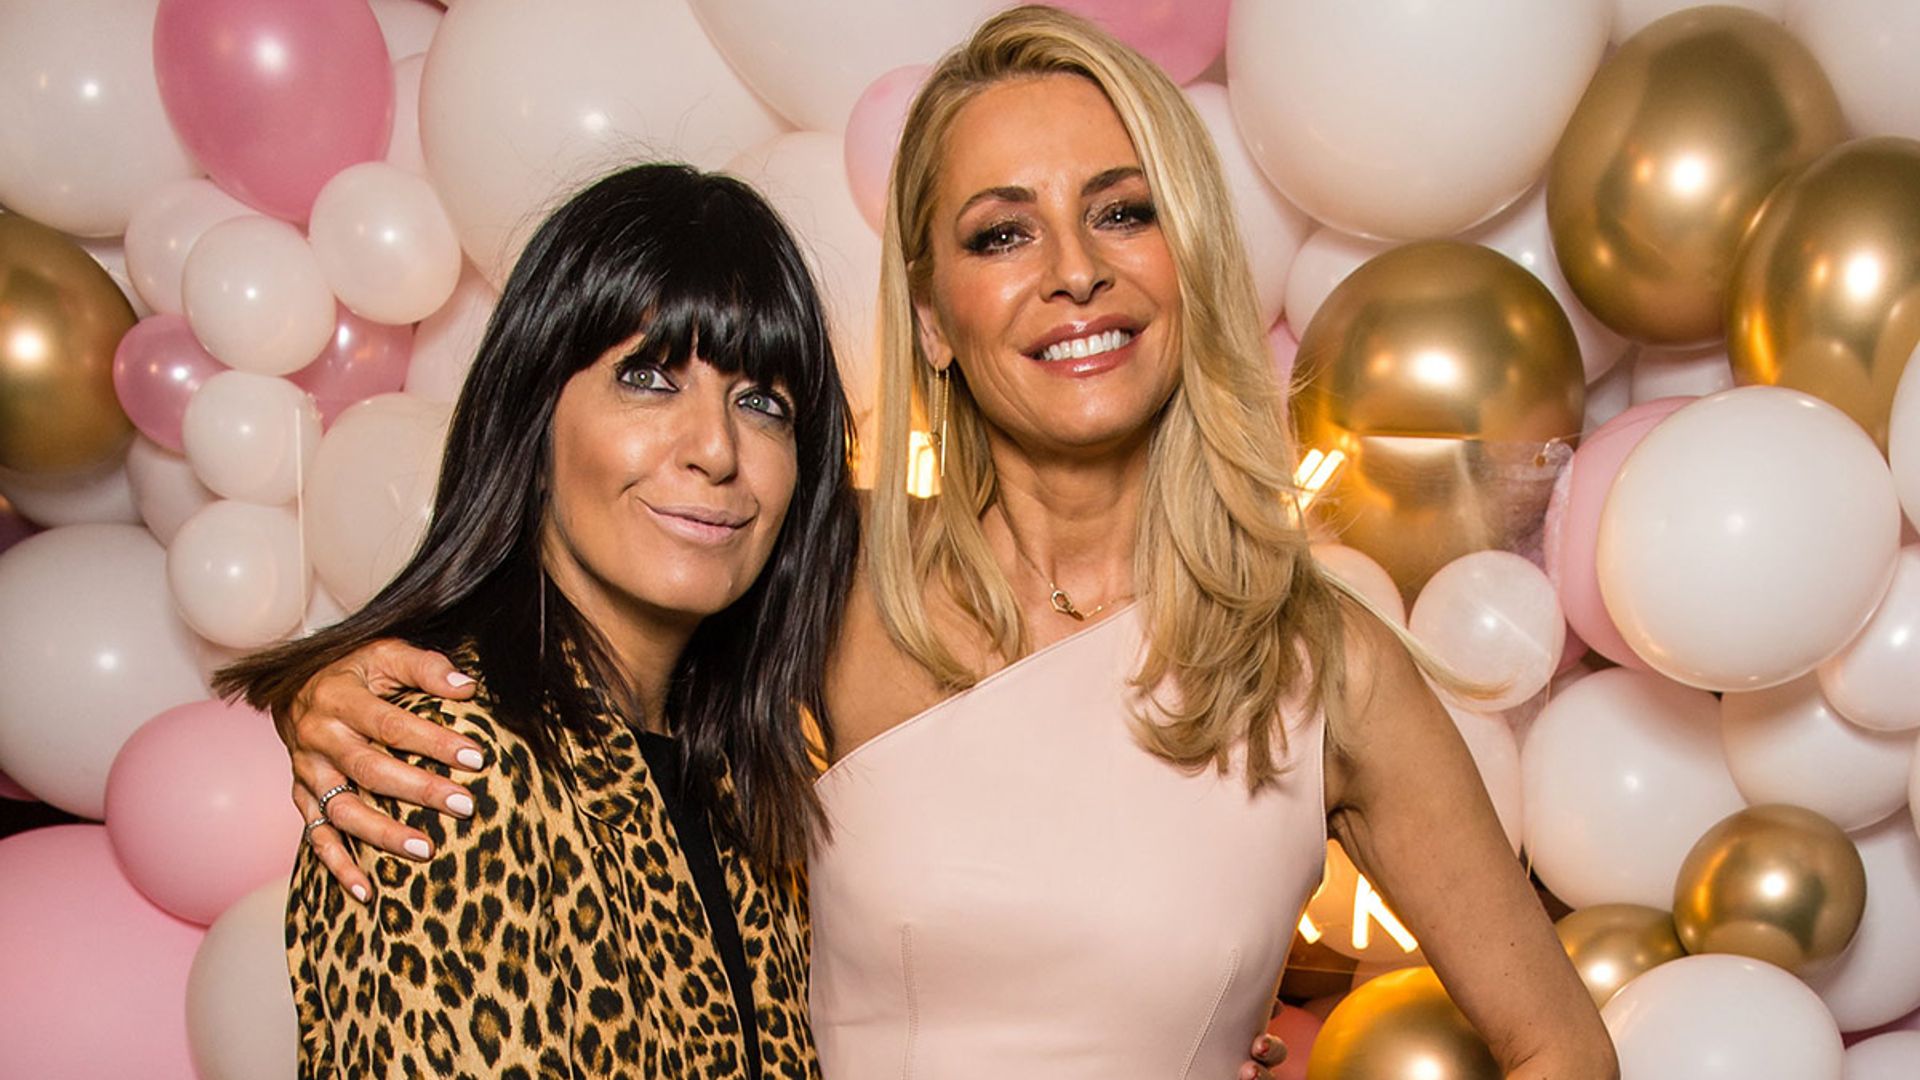 claudia winkleman and tess daly balloons